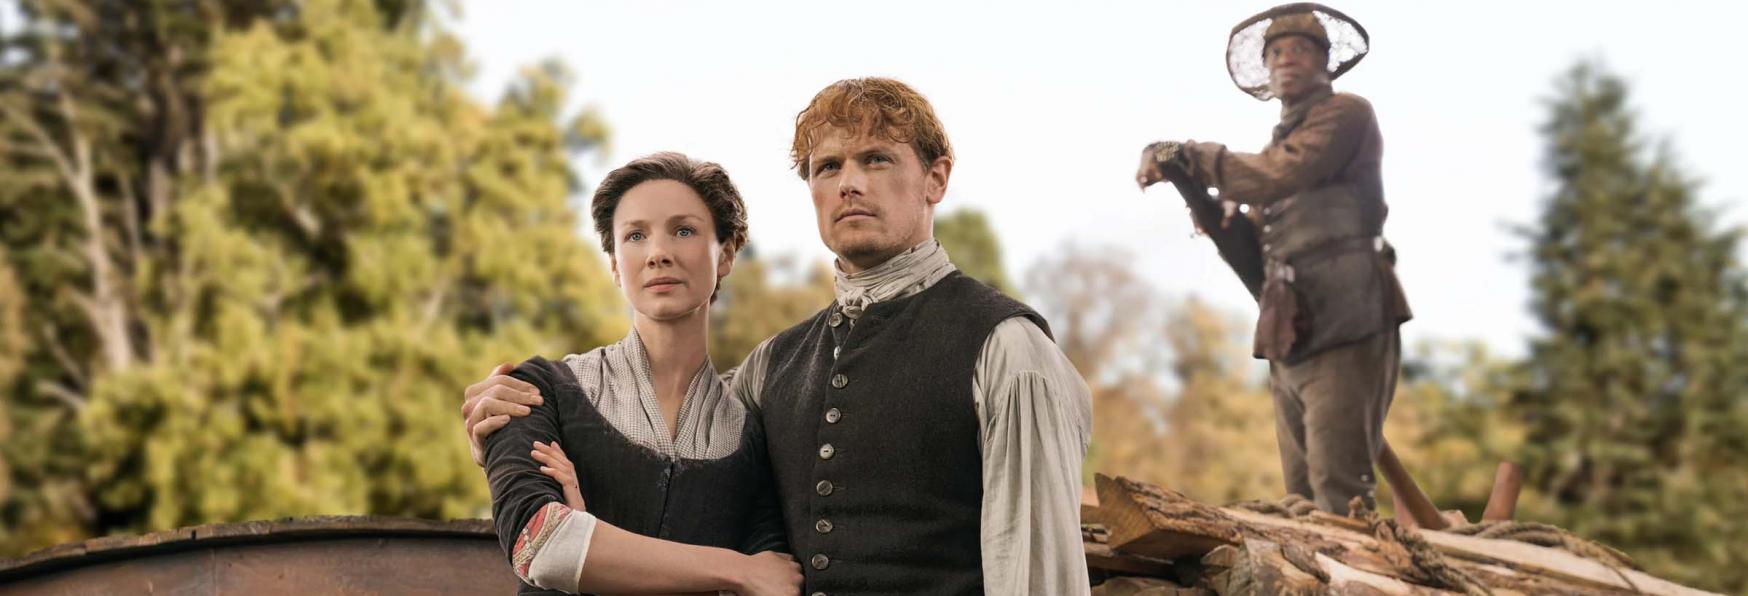 Outlander: New Information on the Prequel of the TV Series based on the novels of Diana Gabaldon